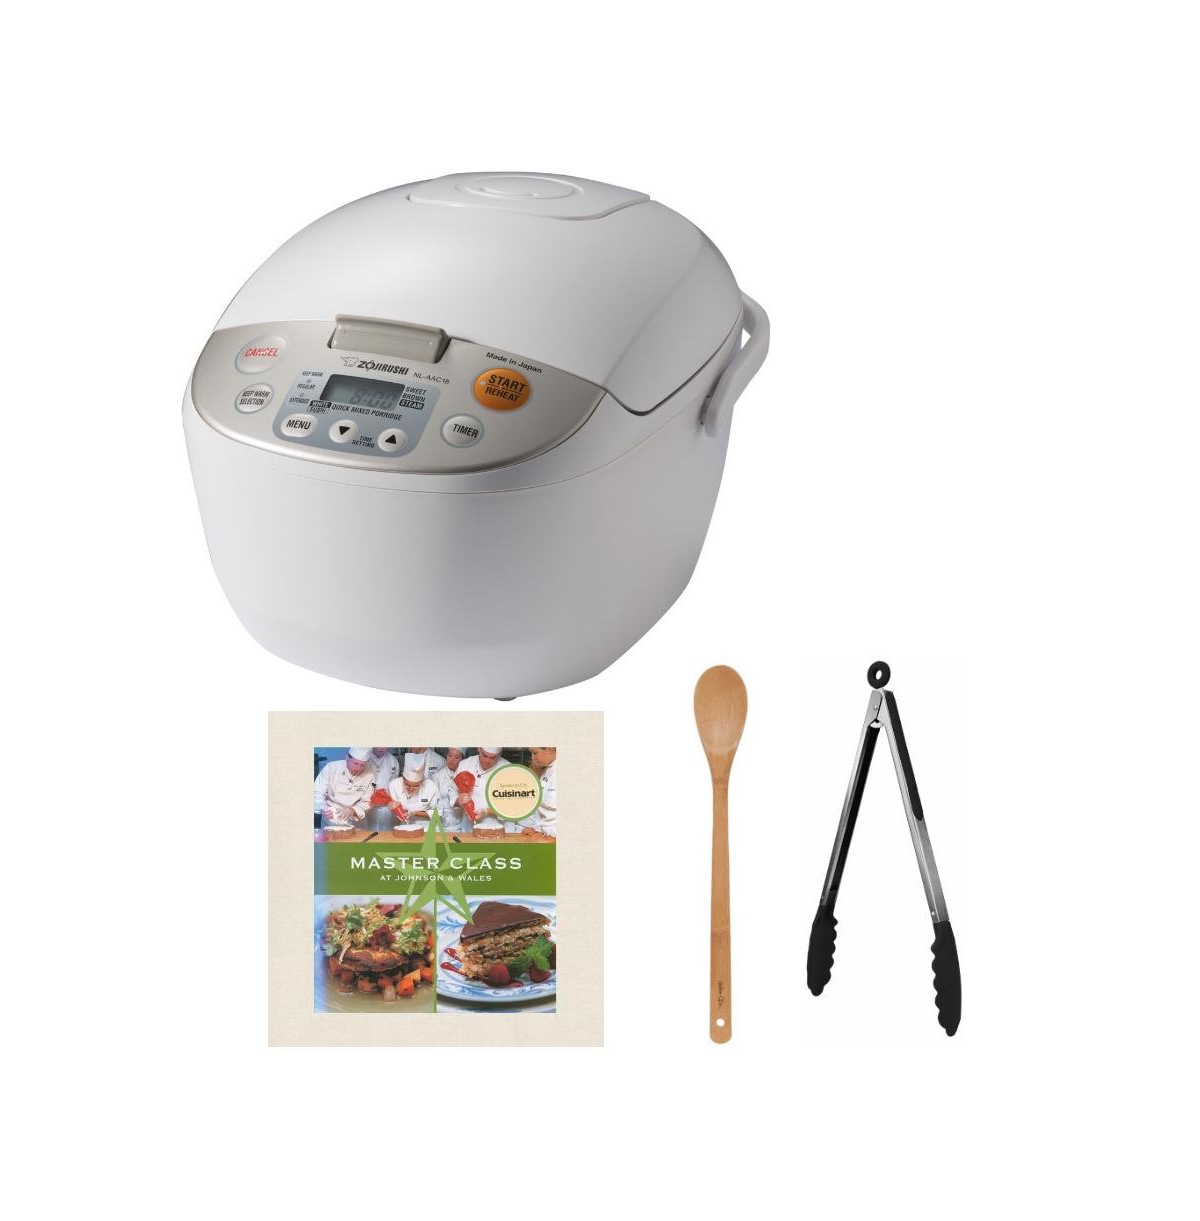 Micom Rice Cooker and Warmer (10-Cup) with Cookbook, Spoon and Tongs - White